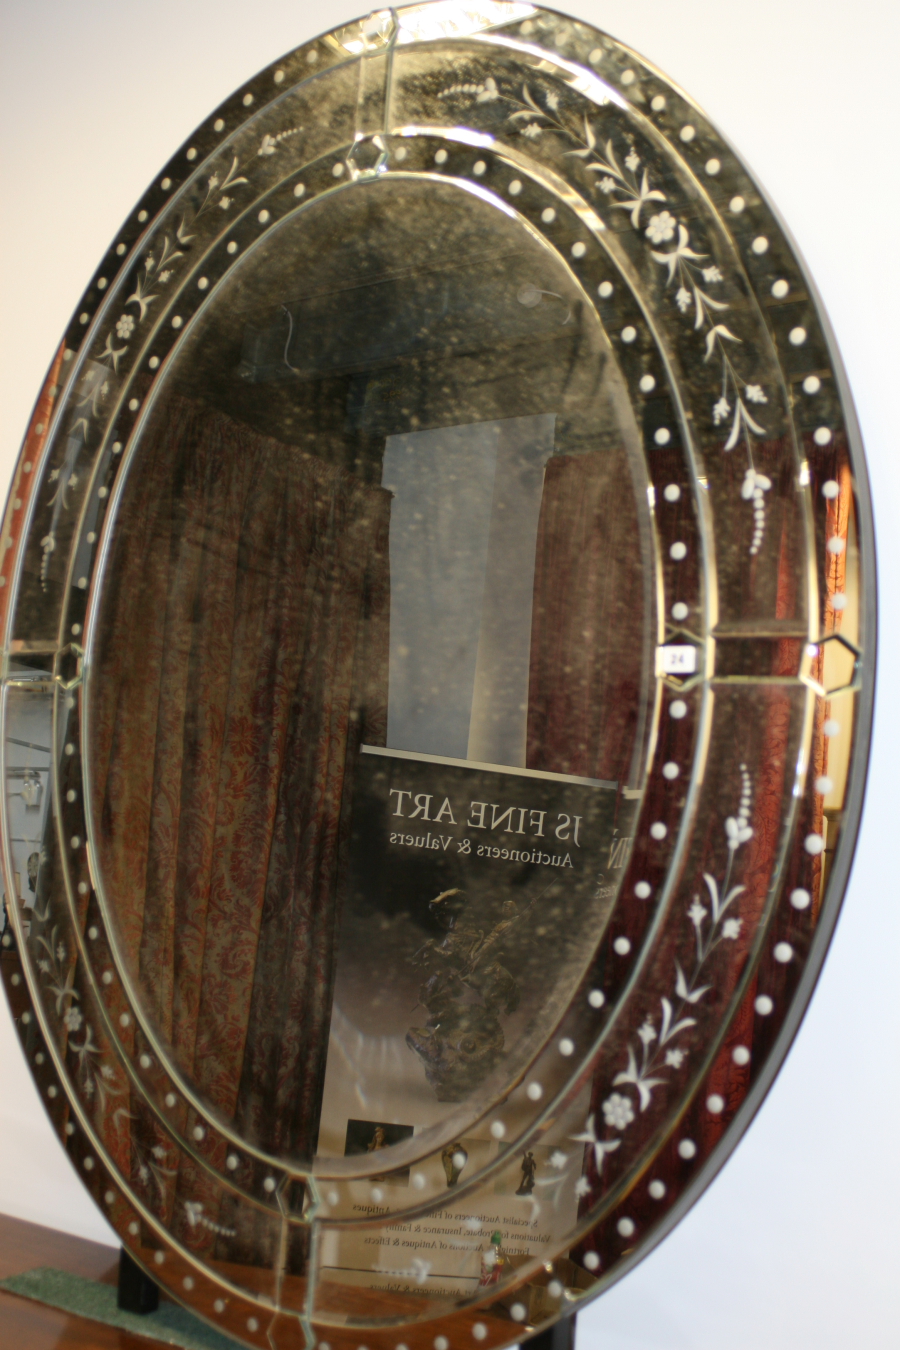 A VIENNA STYLE LARGE OVAL MIRROR